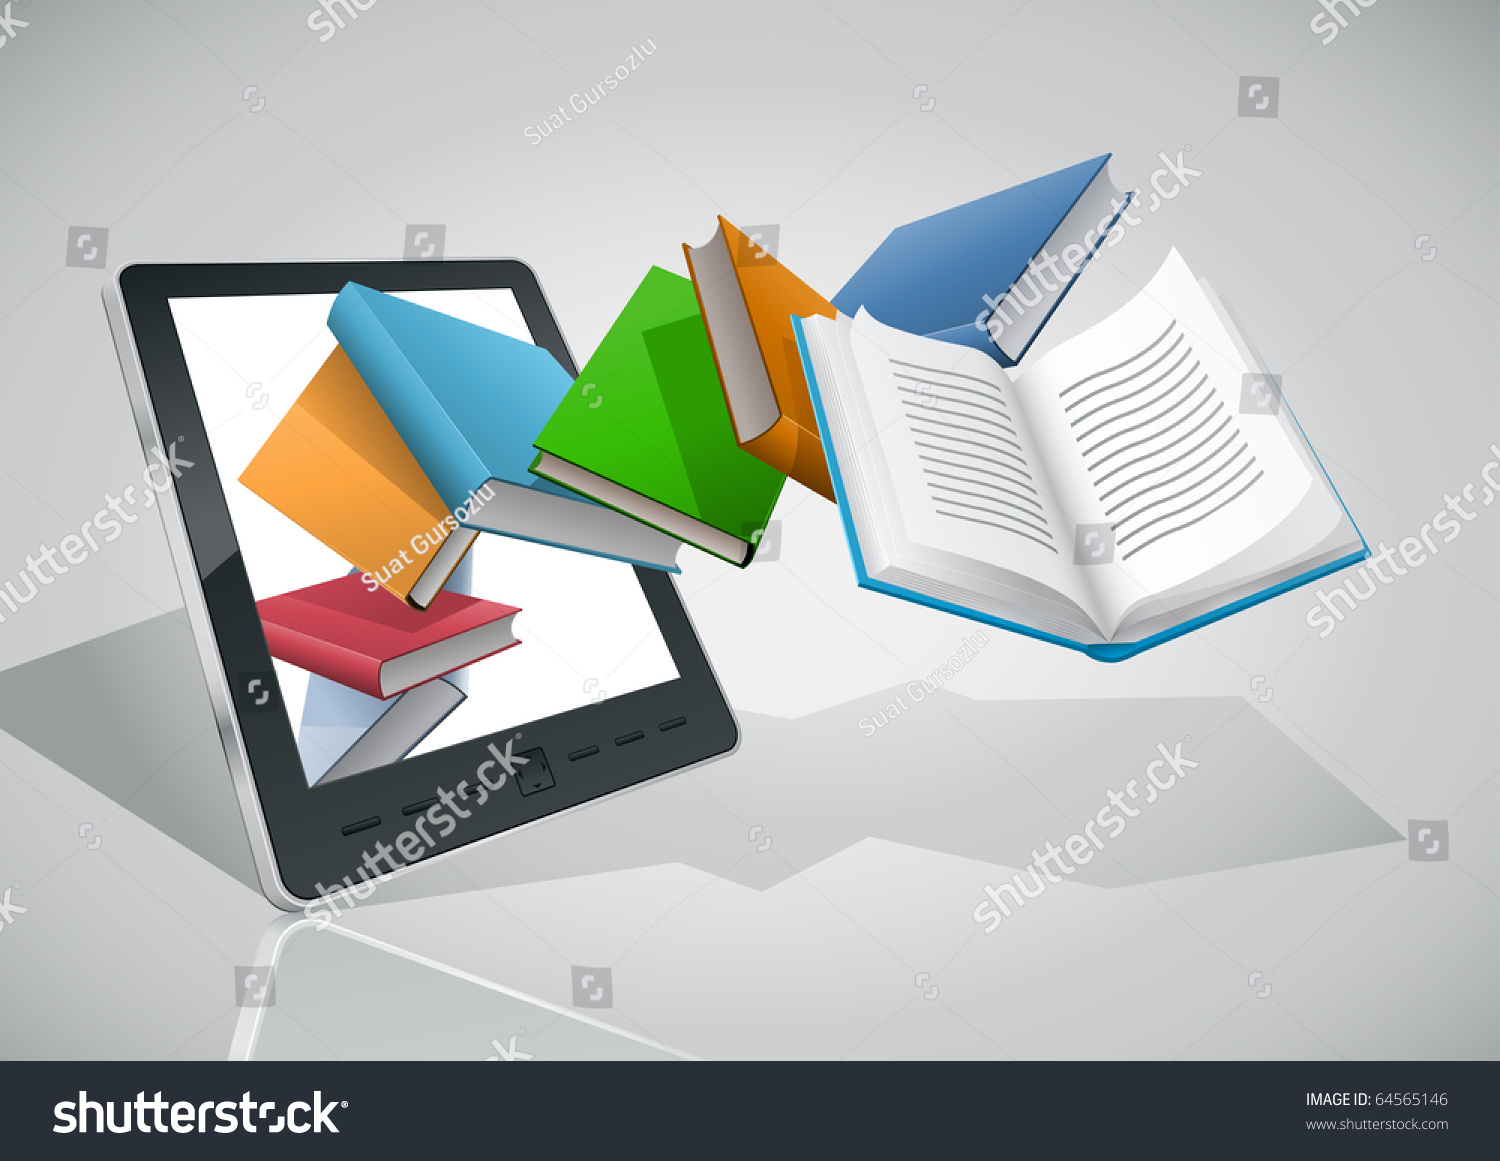 EBook Reader And Books. Vector Illustration. Elements Are